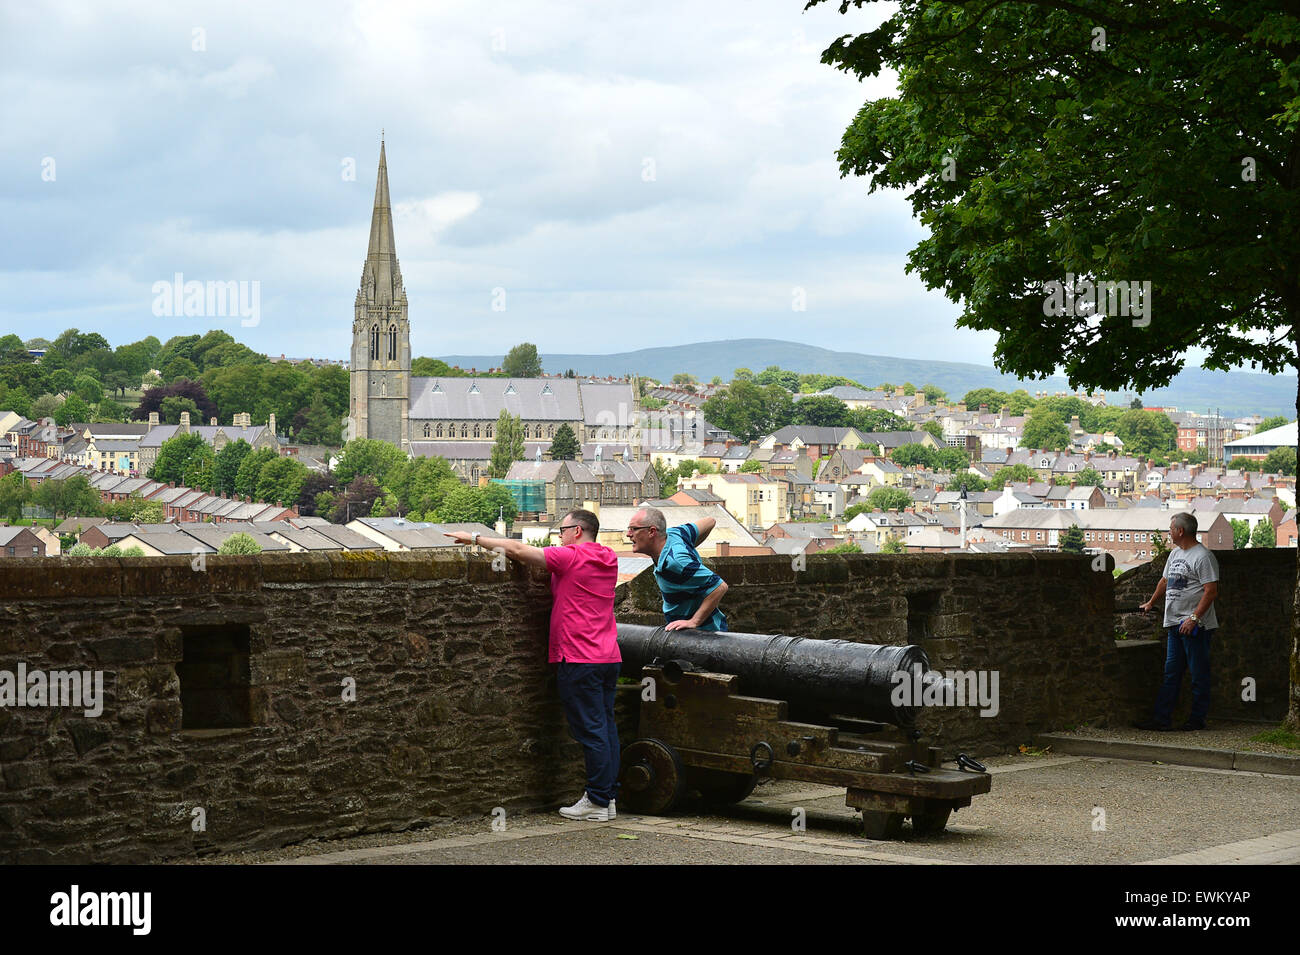 Tourists walk on the 17th century Derry Walls in Londonderry, Northern Ireland. Stock Photo